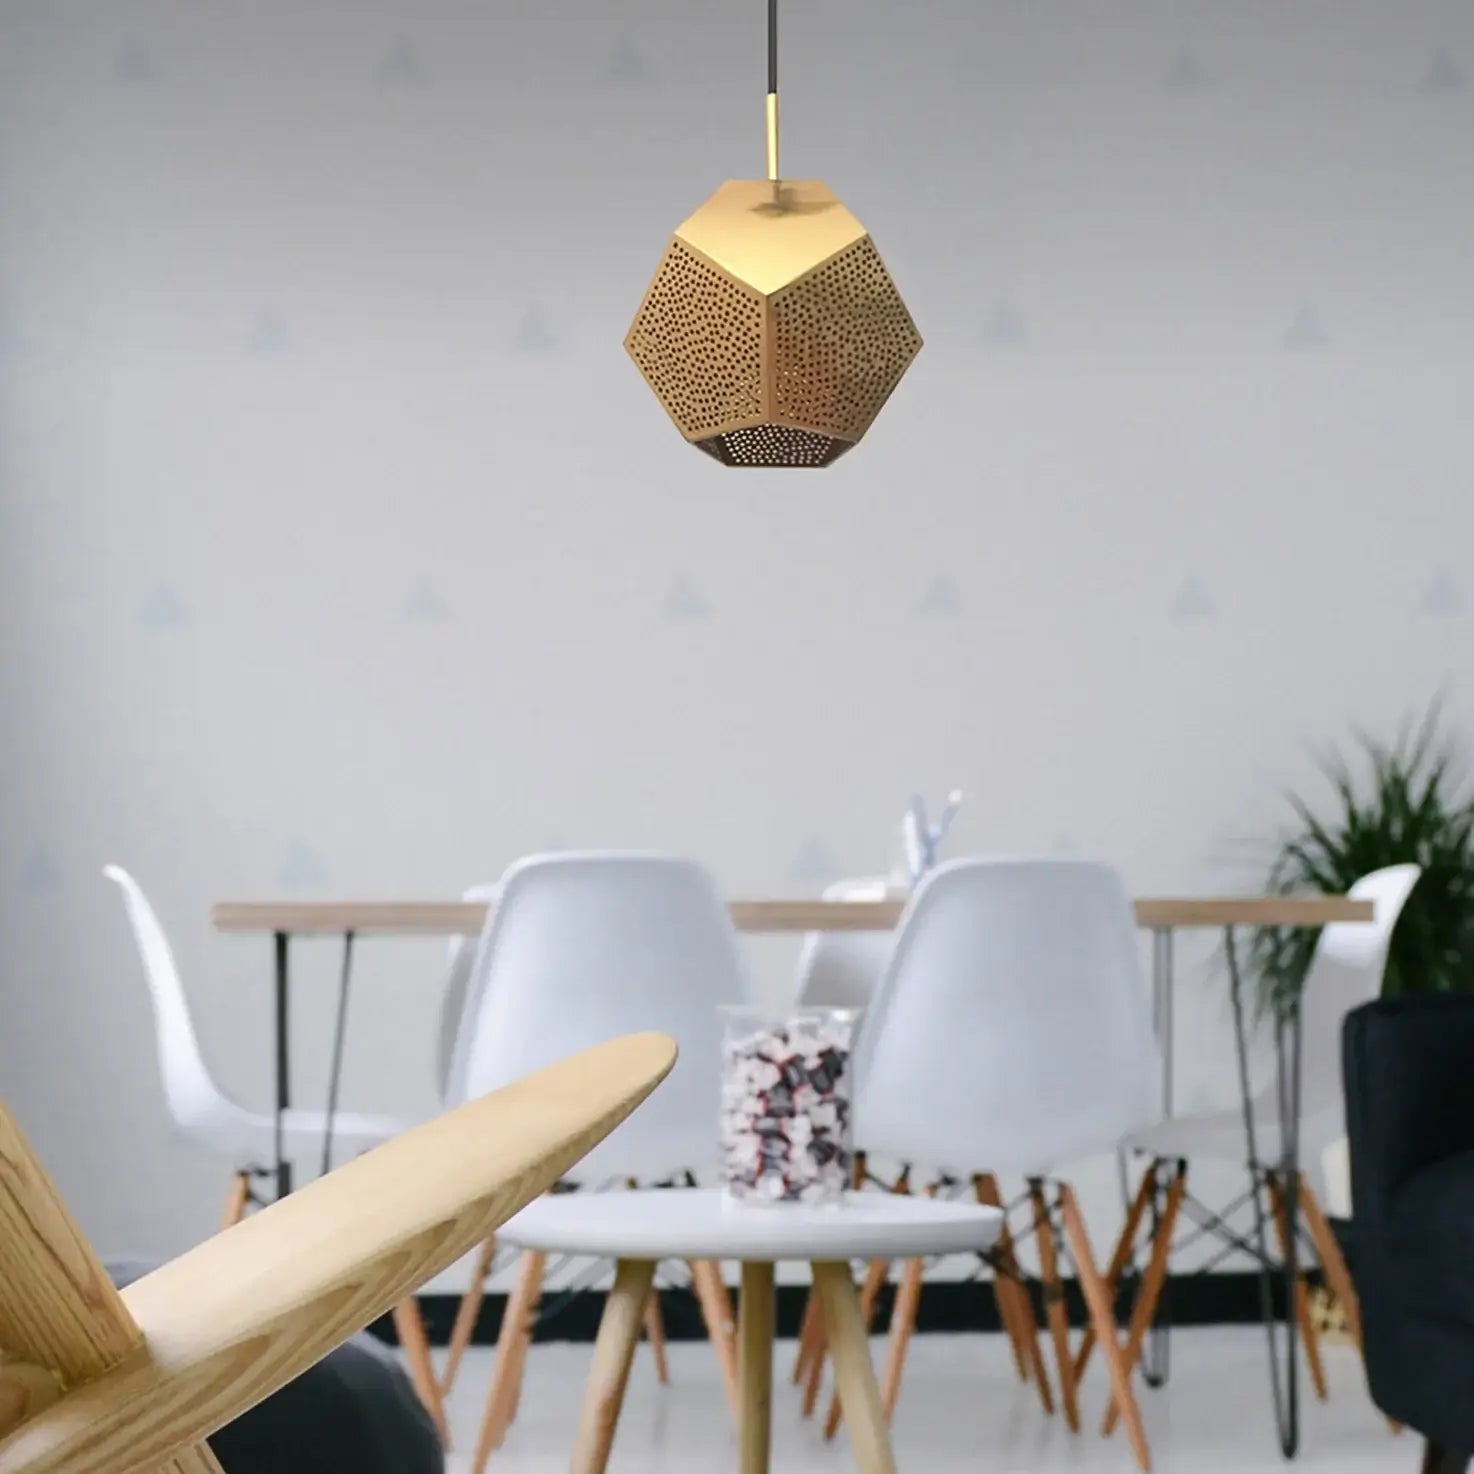 Dounia home Pendant light in Polished brass made of METAL, used as a dining room lighting, Model: Ula